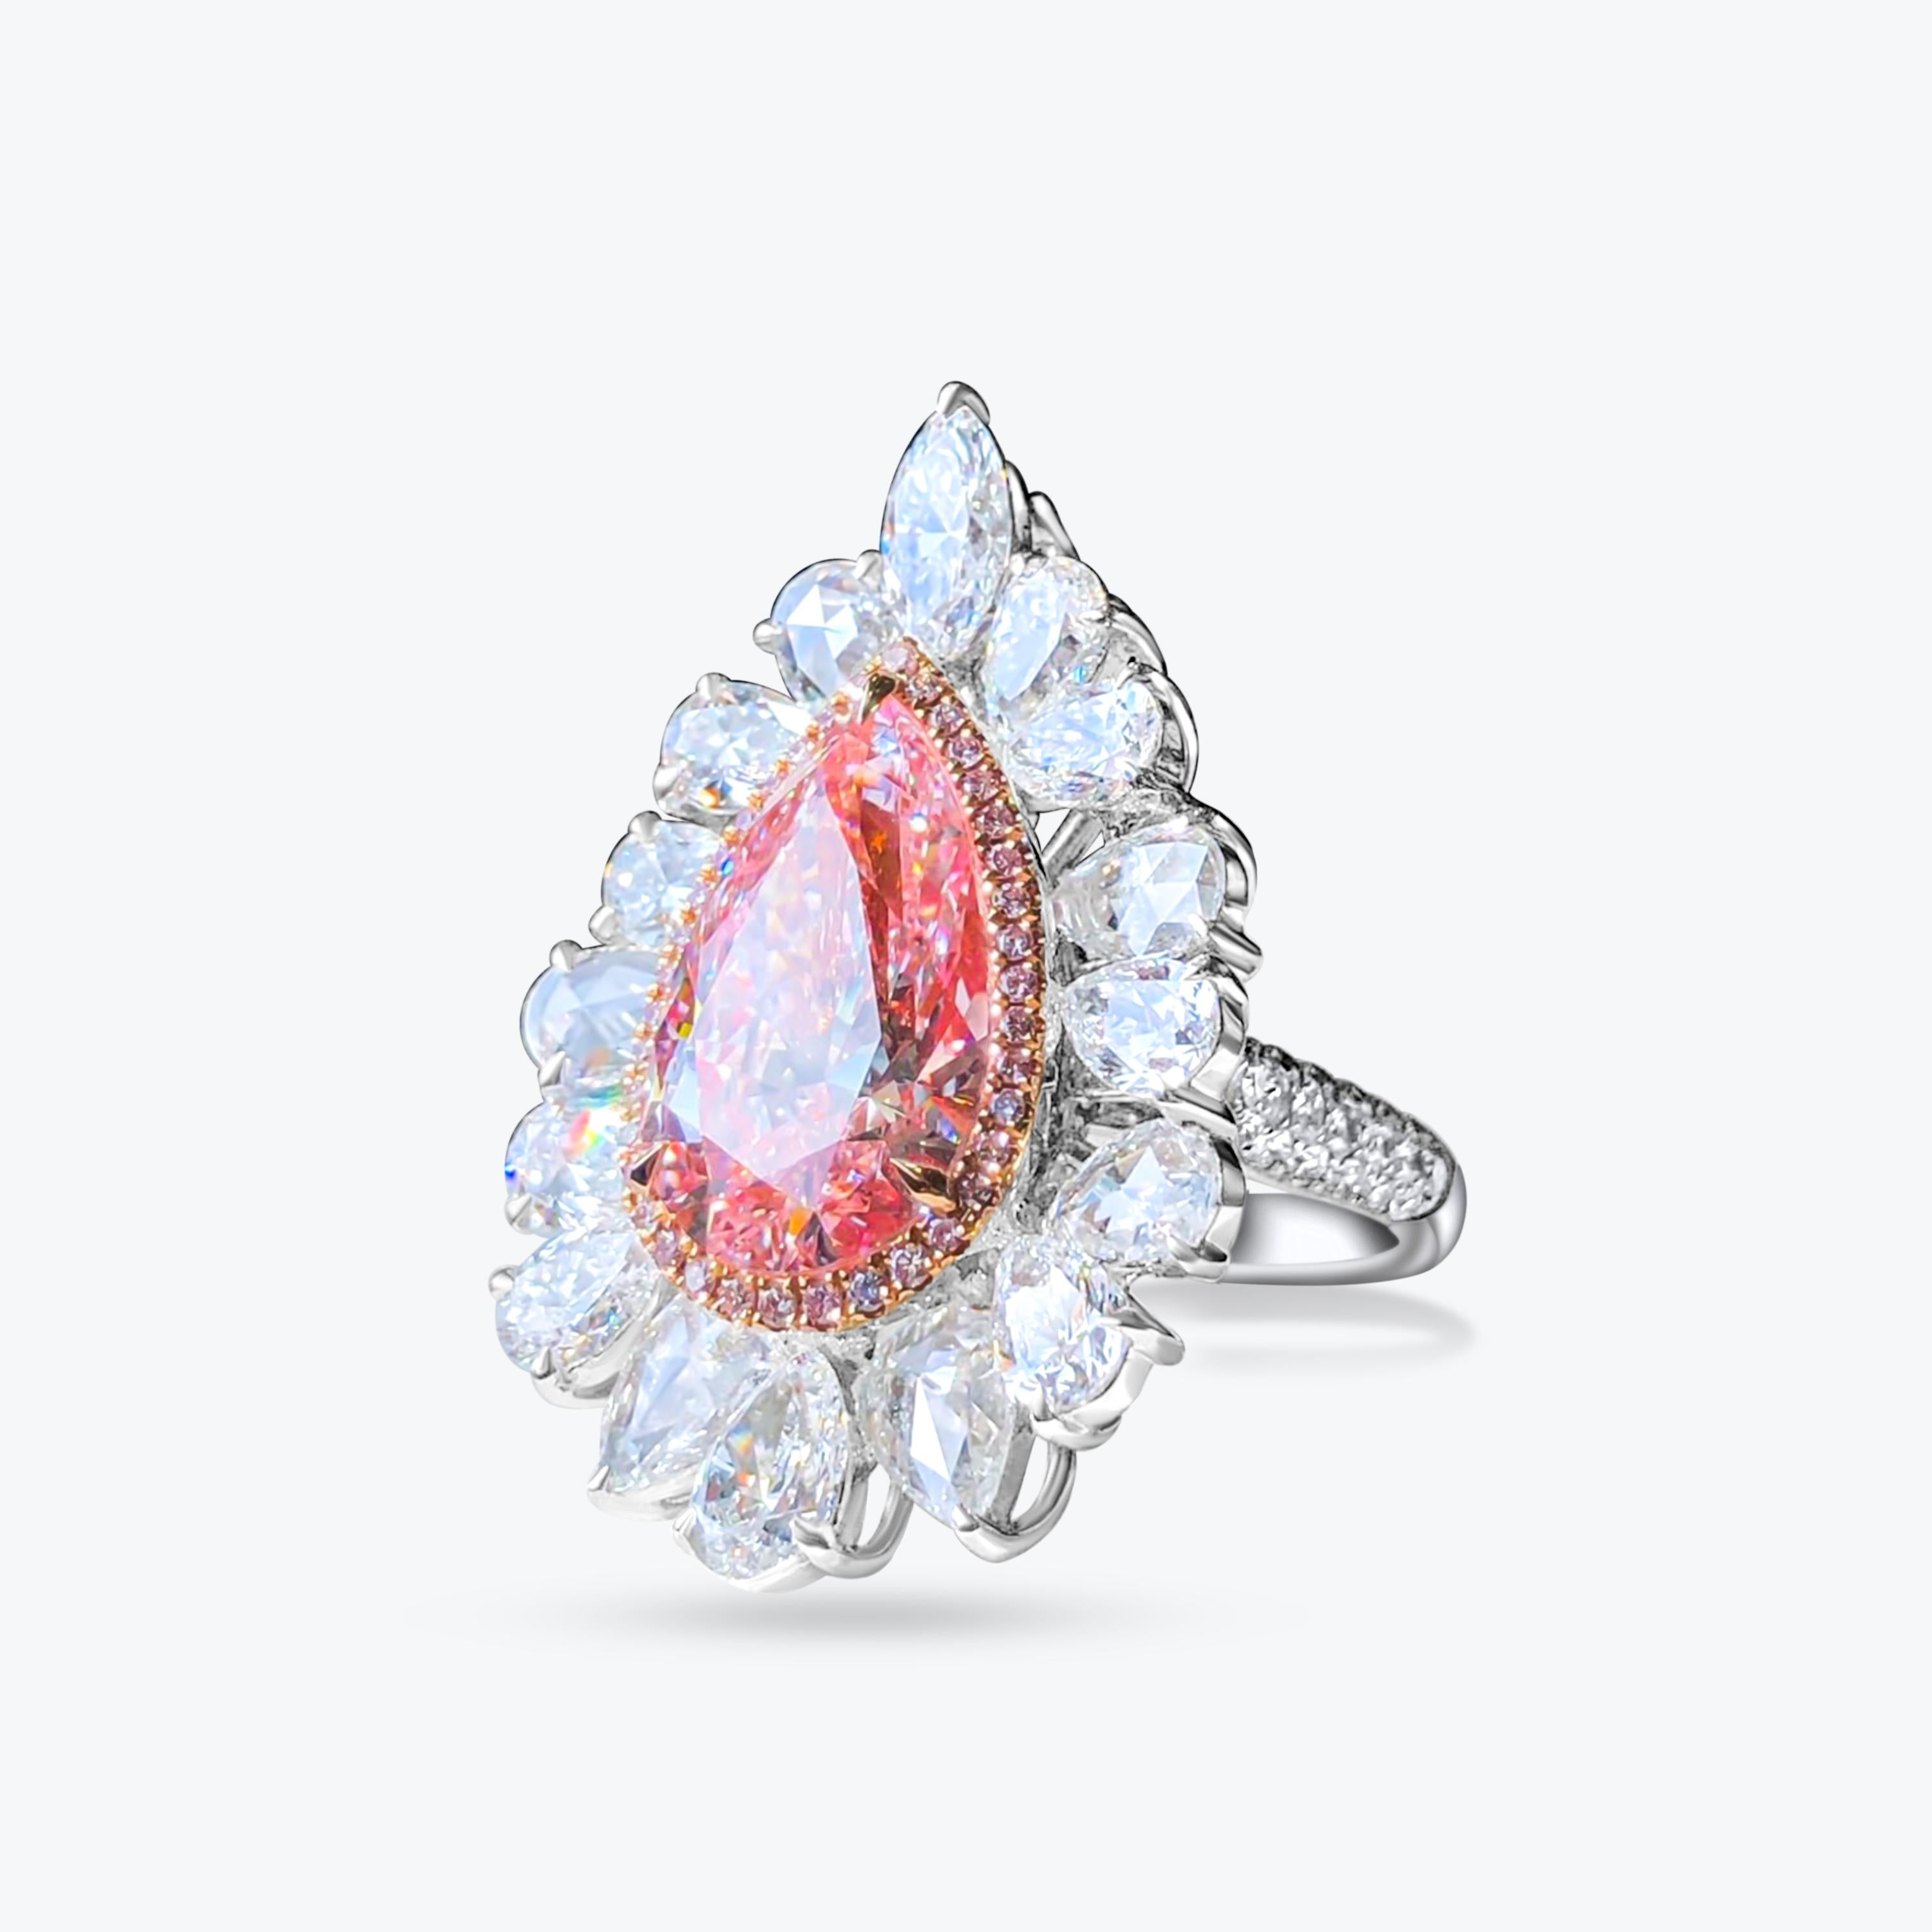 We invite you to discover this rare and modern Halo cocktail ring set with a 7,01 carats GIA certified Faint Pink pear cut diamond accented of 10 magnificent pear-cut colorless diamonds all GIA certified. The surprise of this magnificent jewel is